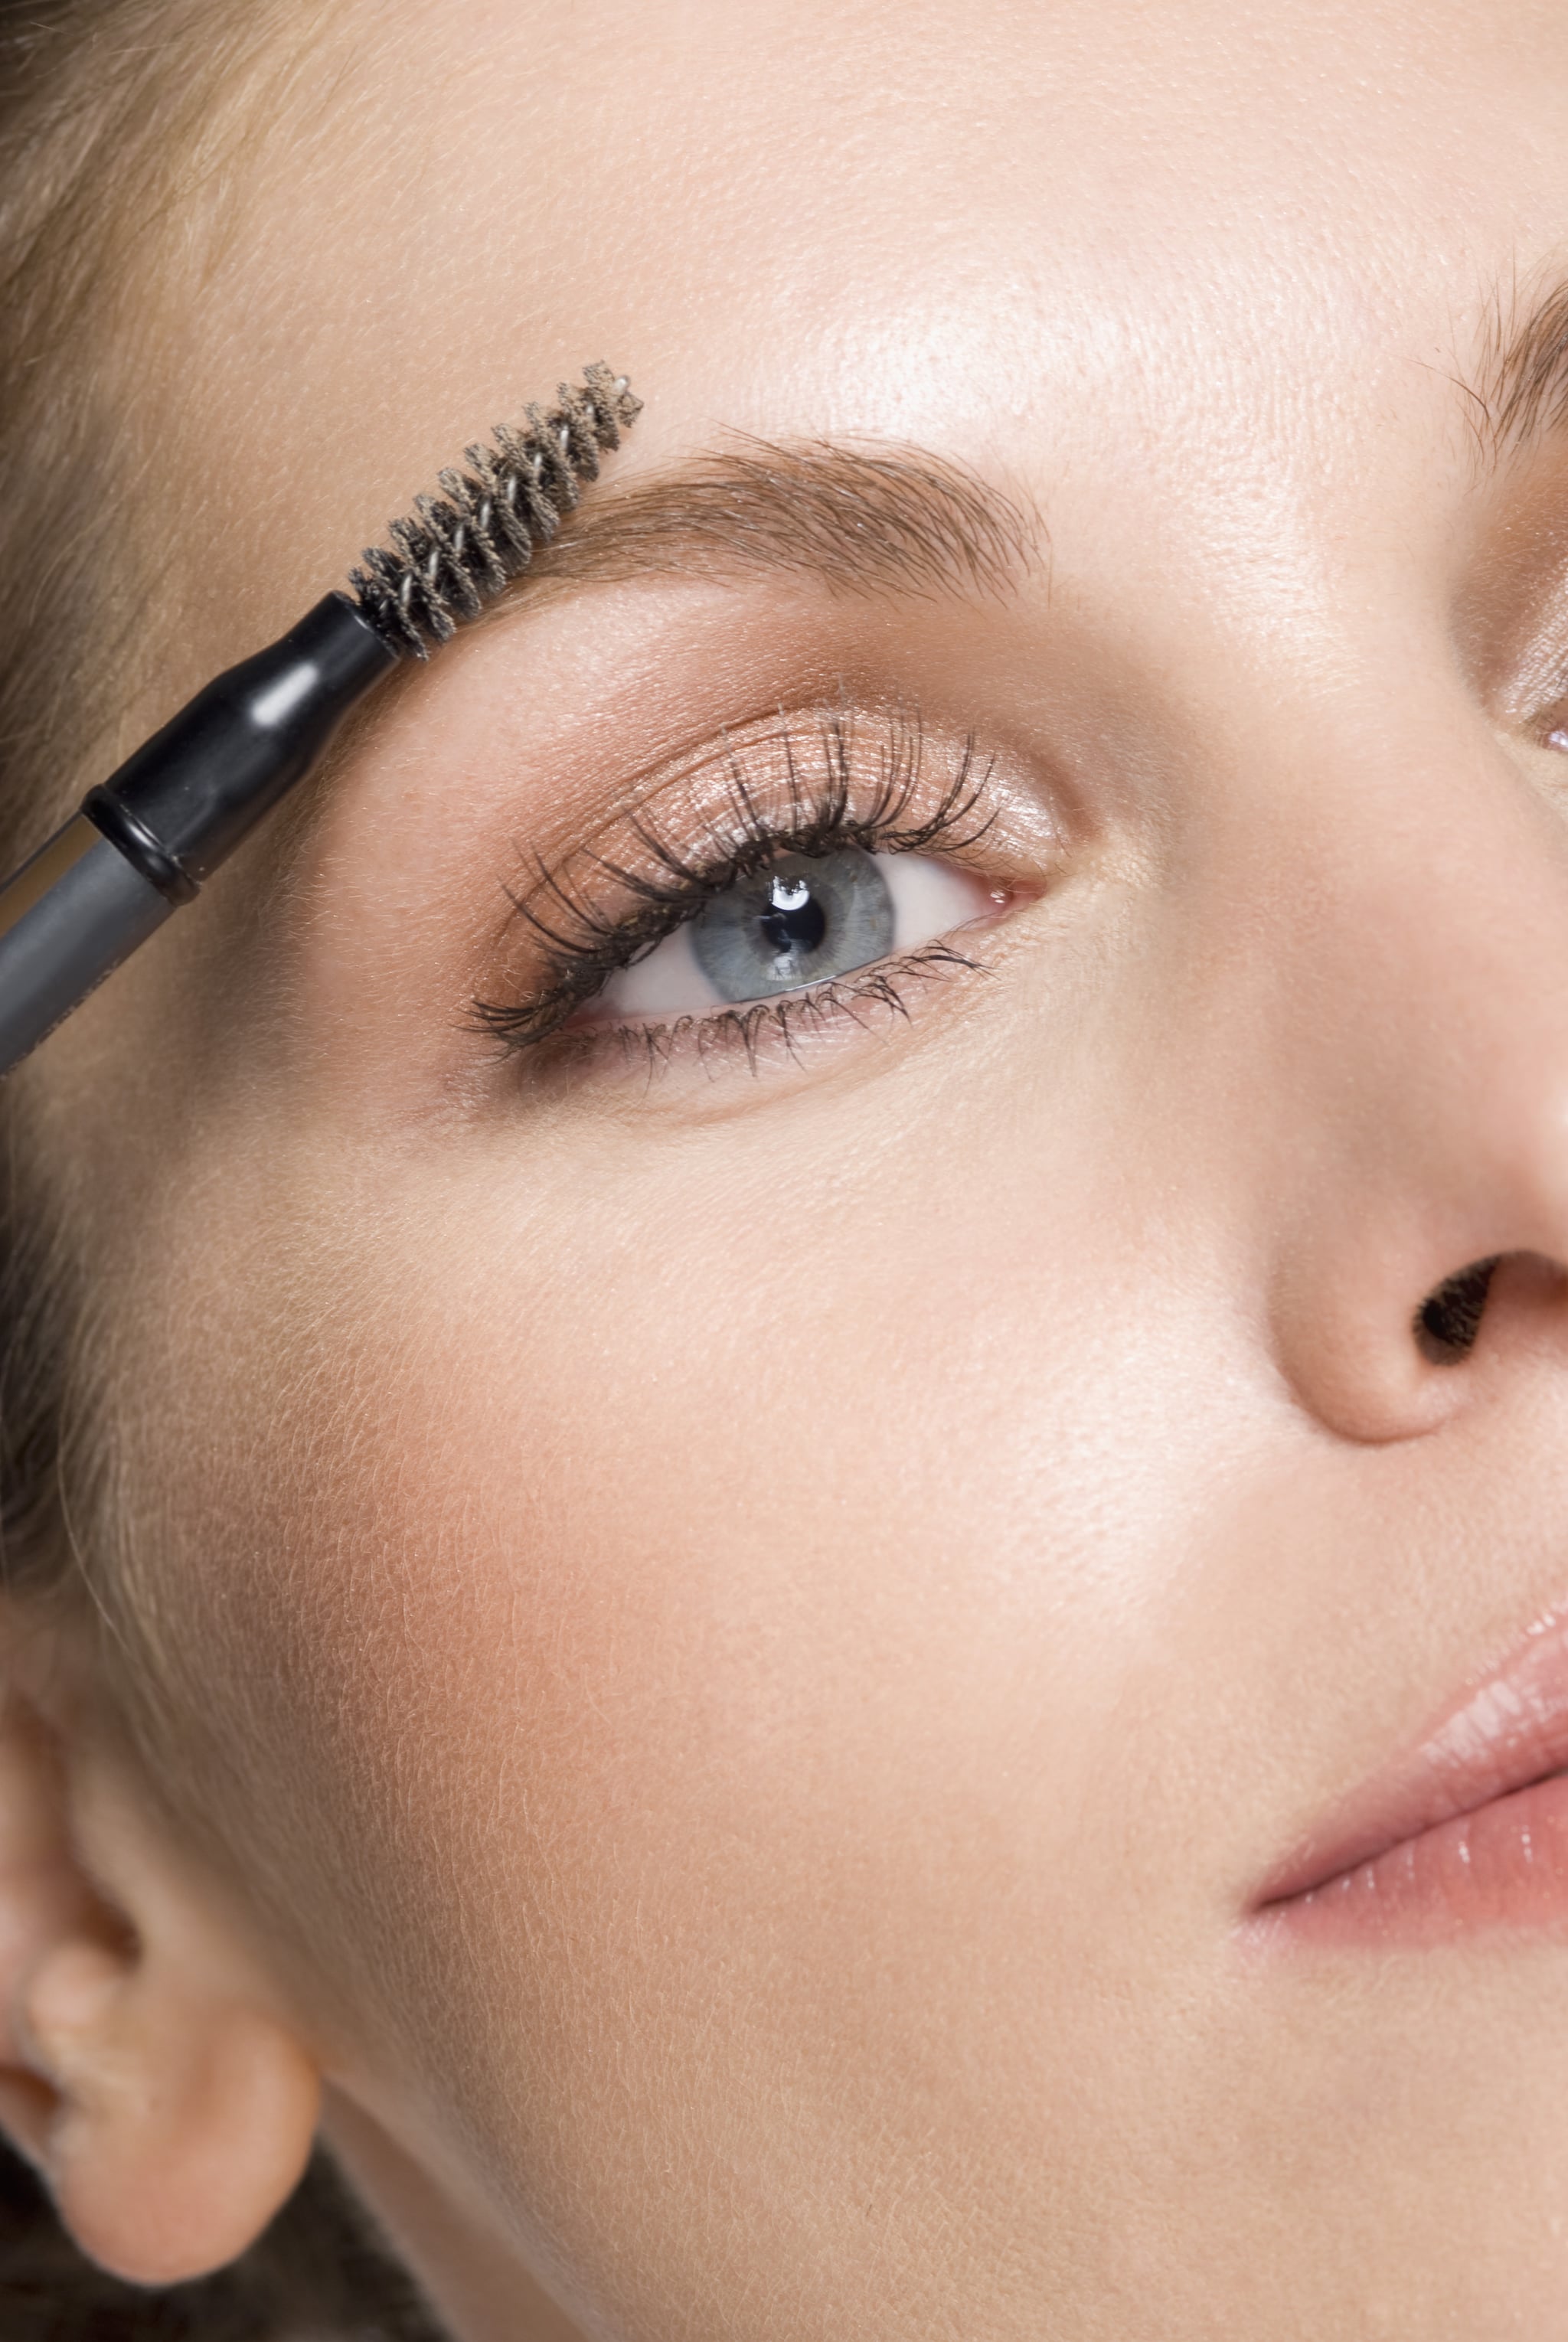 Is DIY Brow Lamination Recommended?